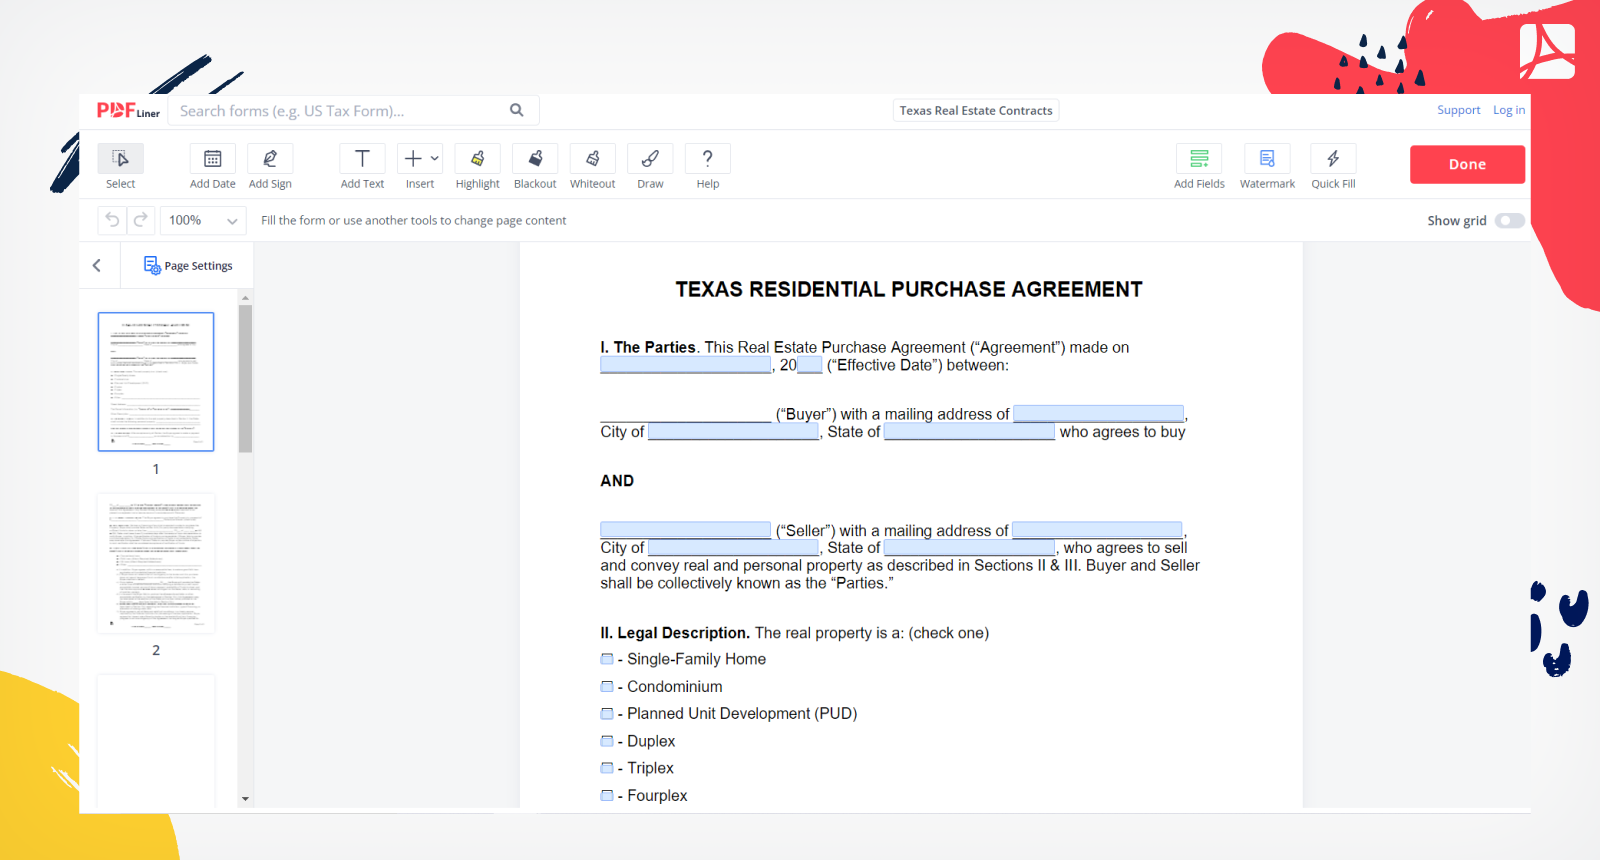 Texas Real Estate Contracts Form Screenshot